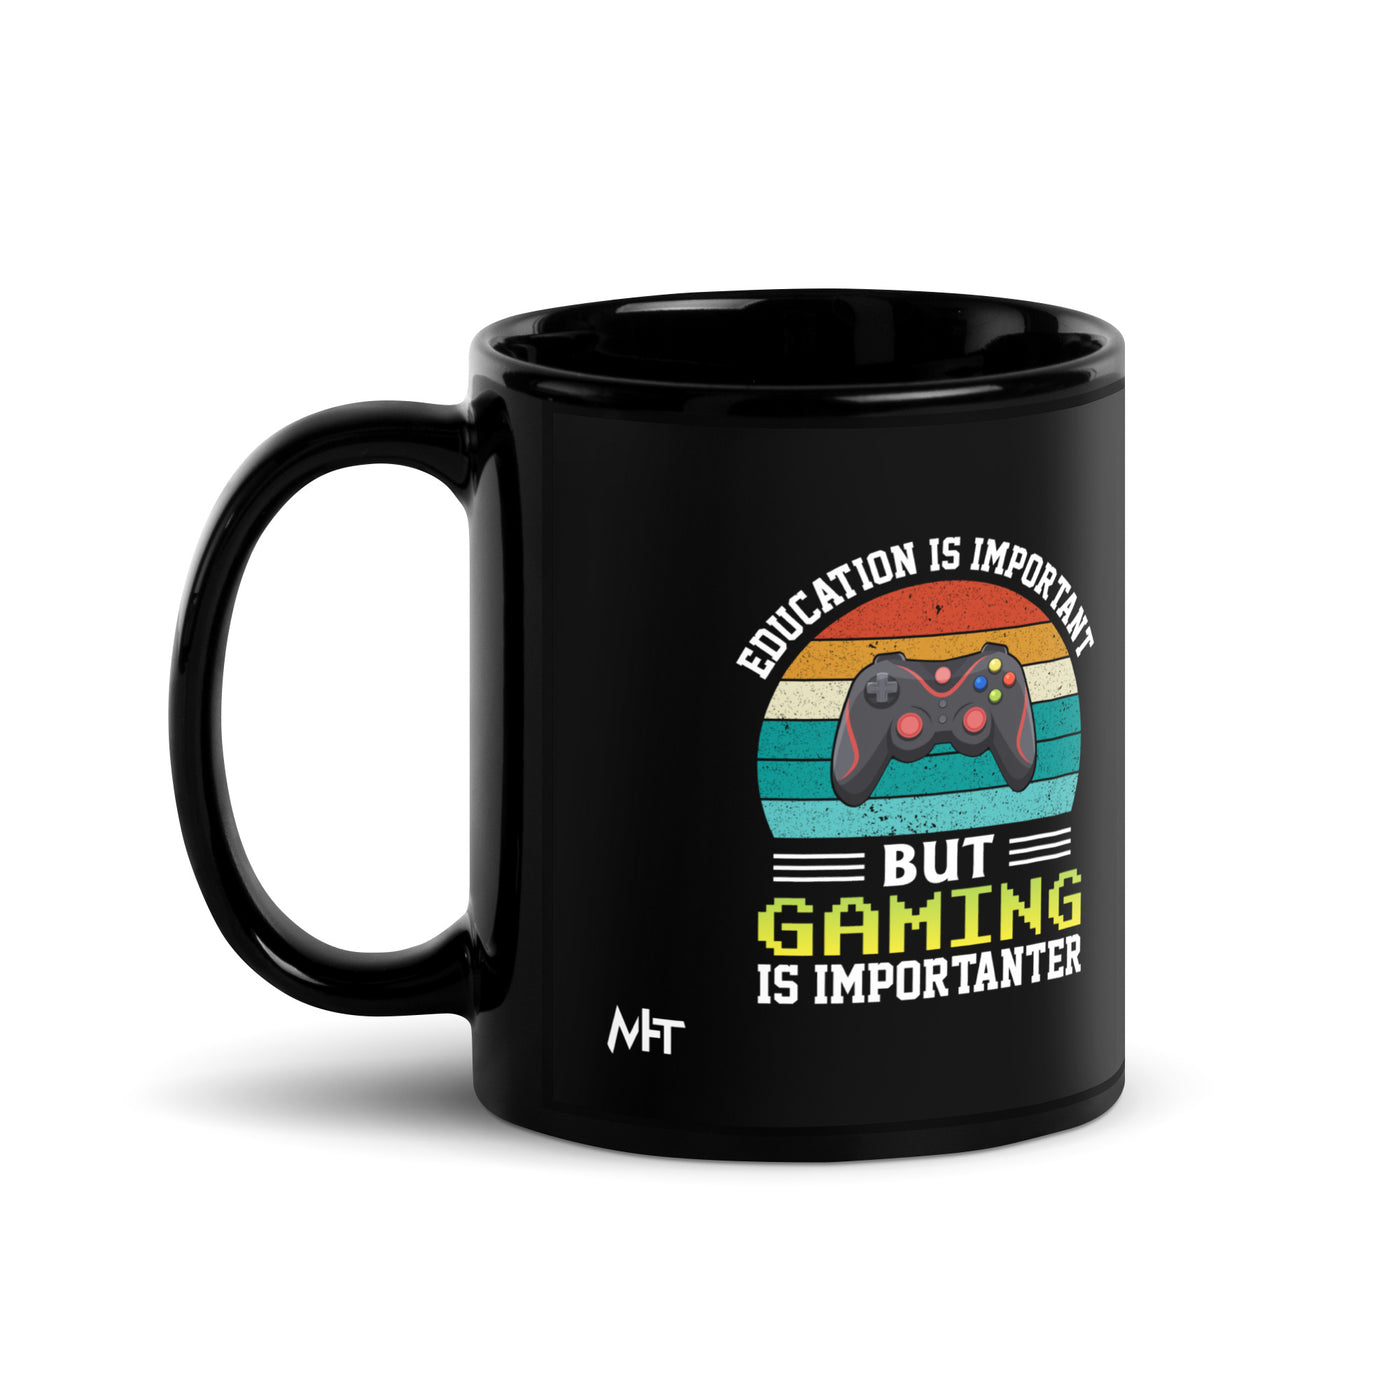 Education is Important, but Gaming is importanter - Black Glossy Mug